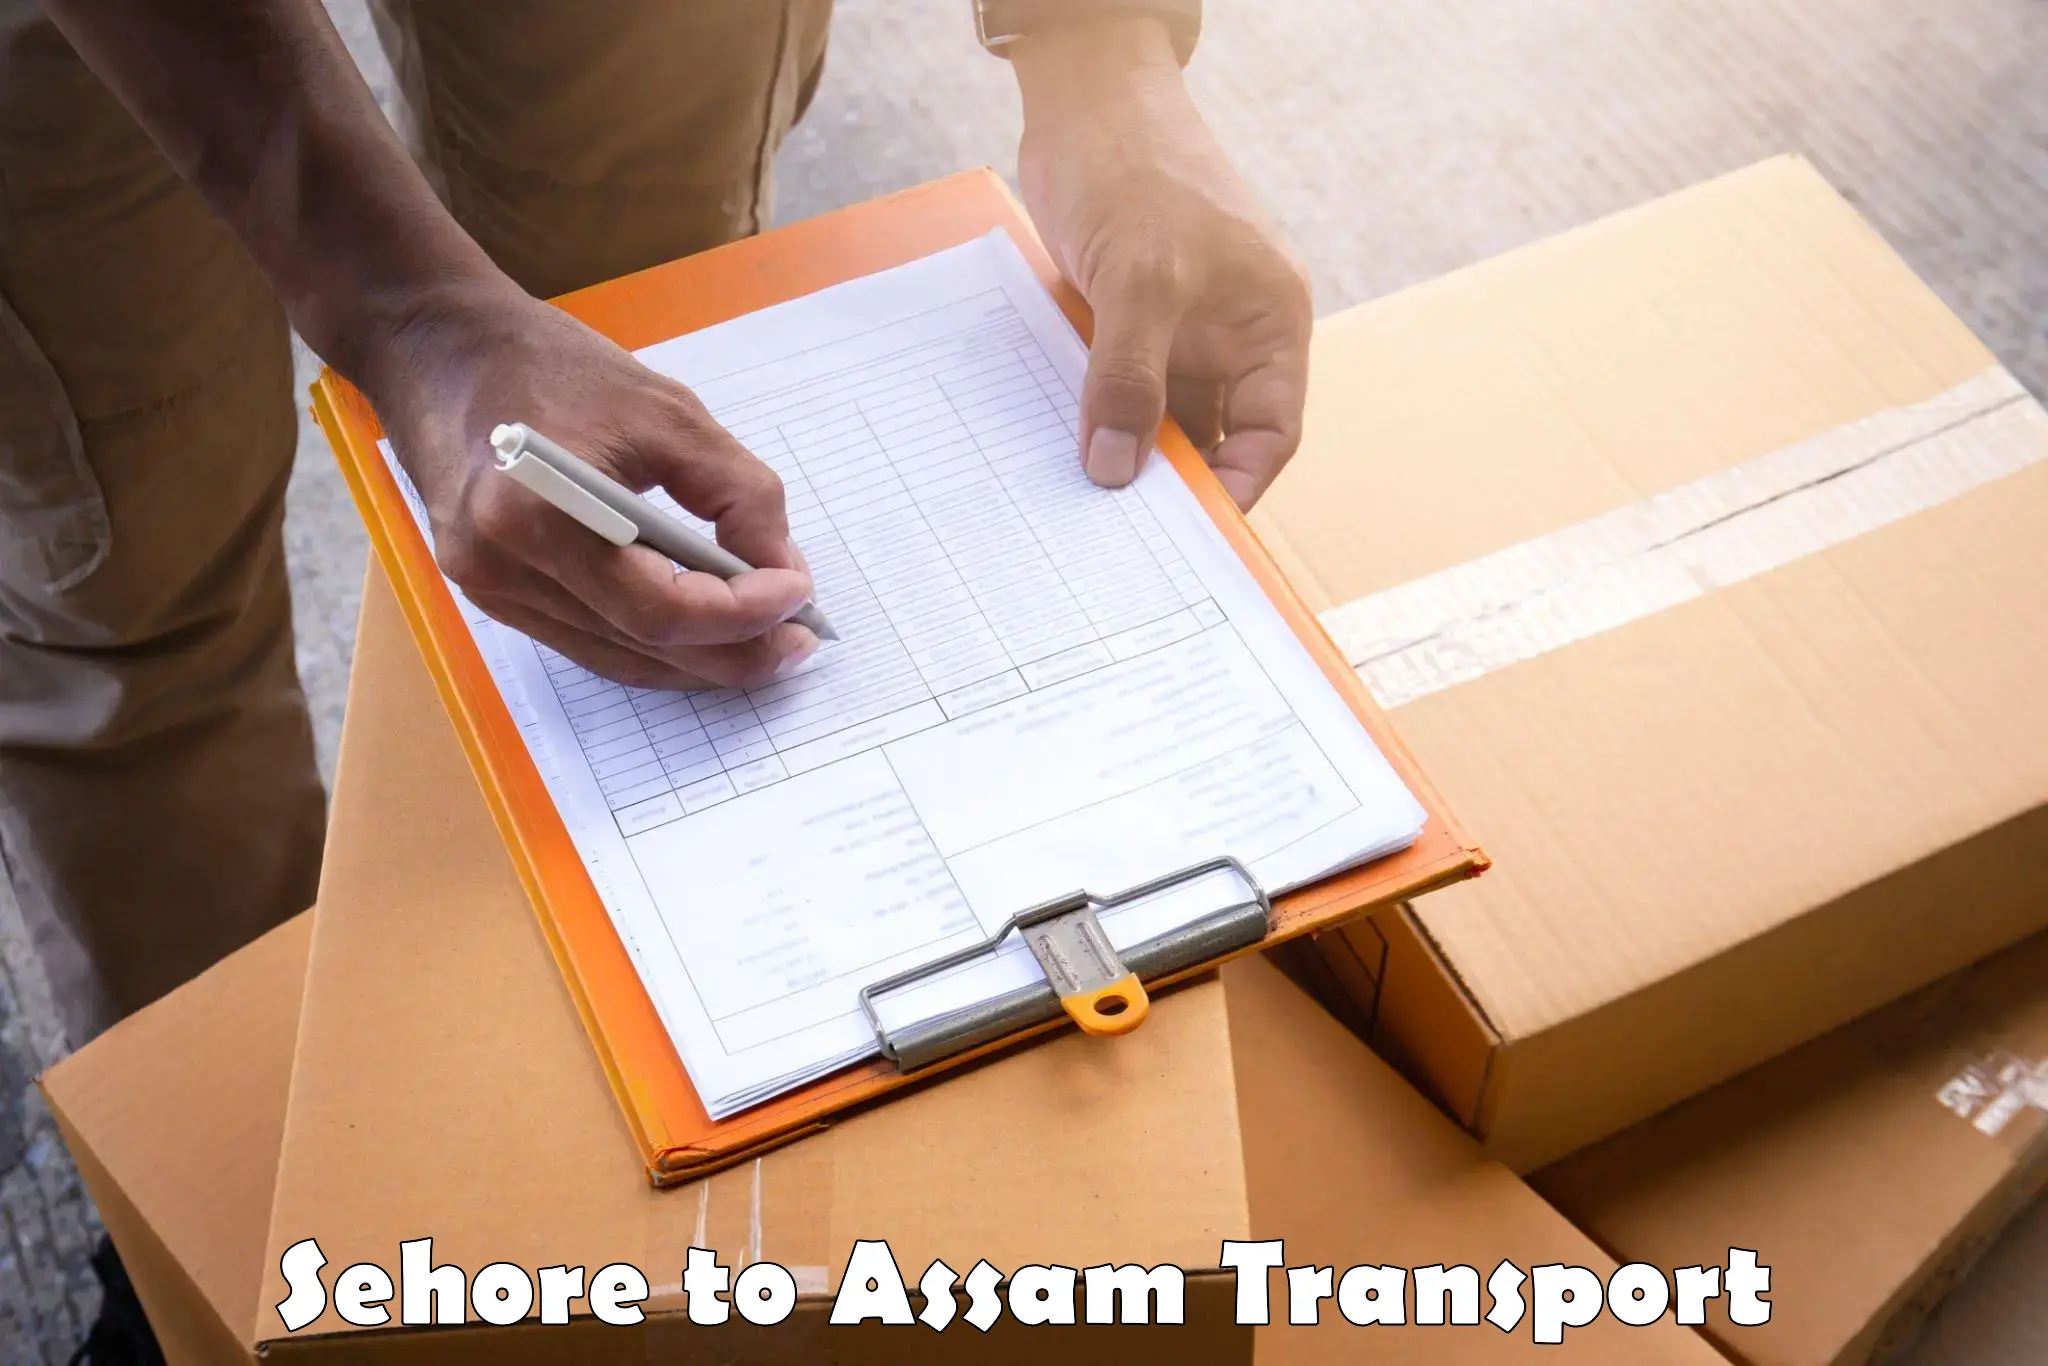 Transport shared services Sehore to Assam